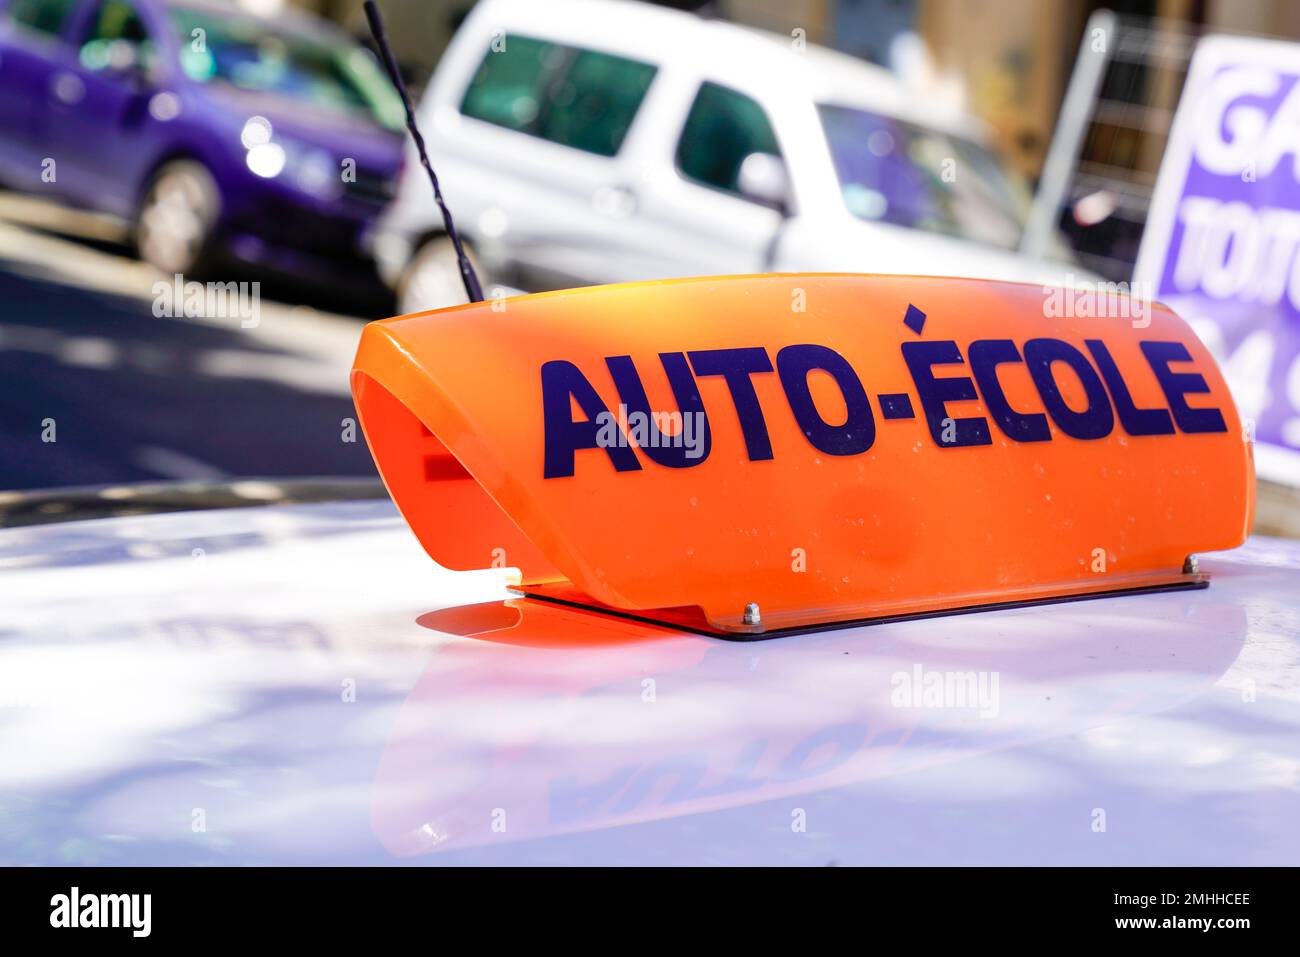 auto ecole text in french means driving school sign write on education learning car roof Stock Photo